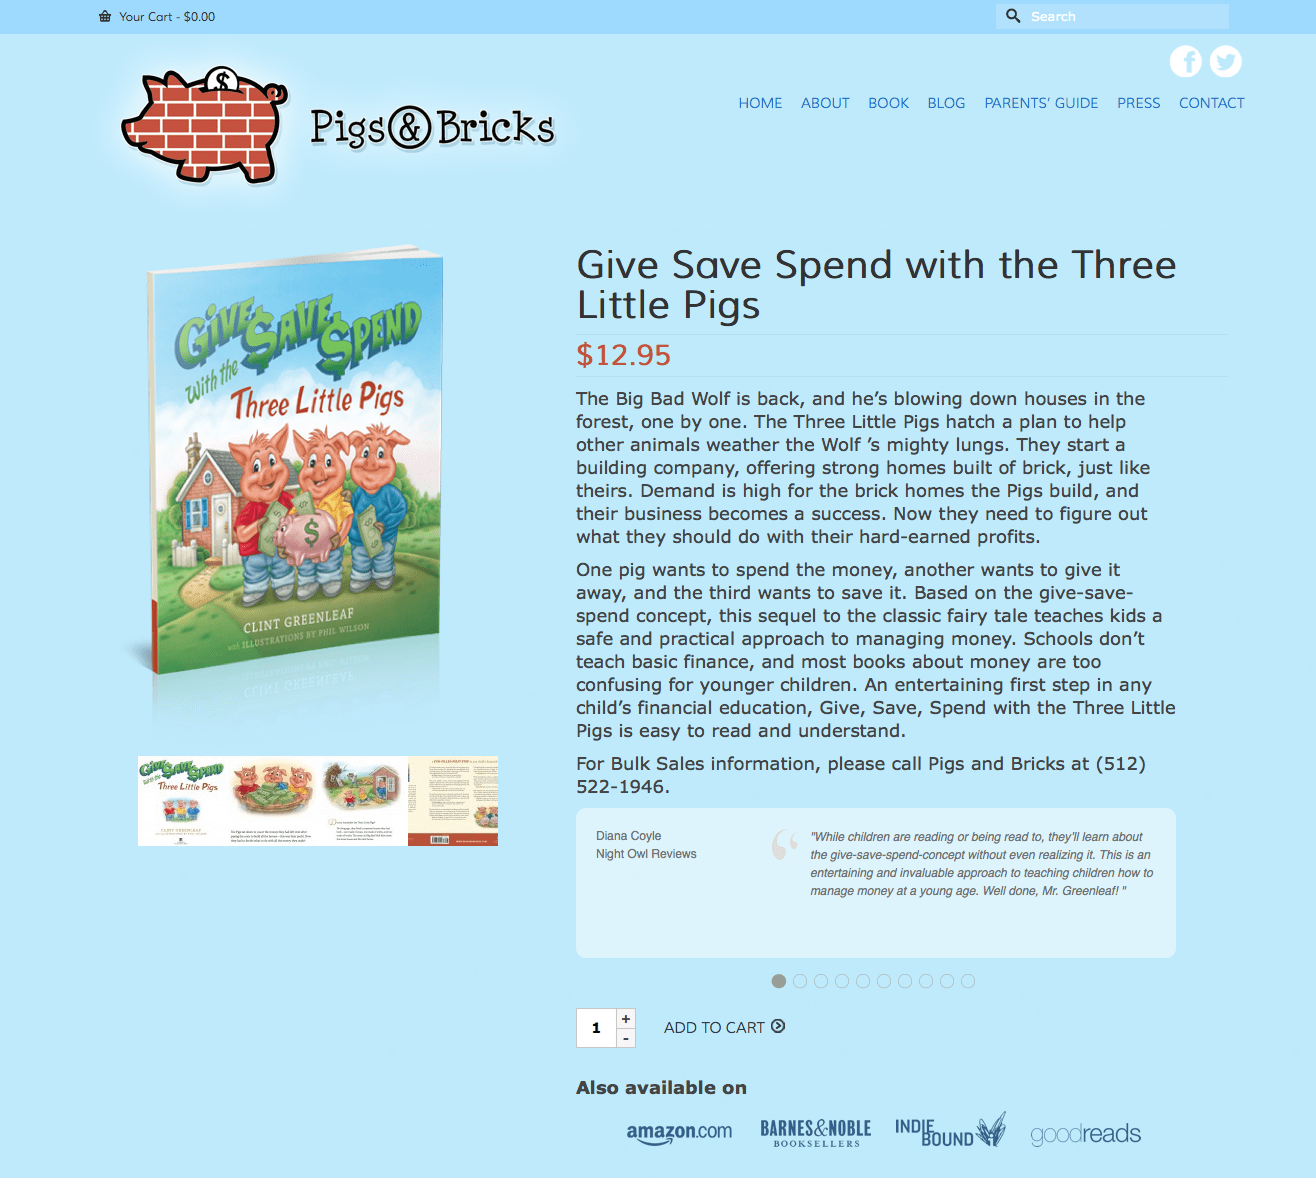 Give Save Spend with the Three Little Pigs | Pigs & Bricks (20140507)